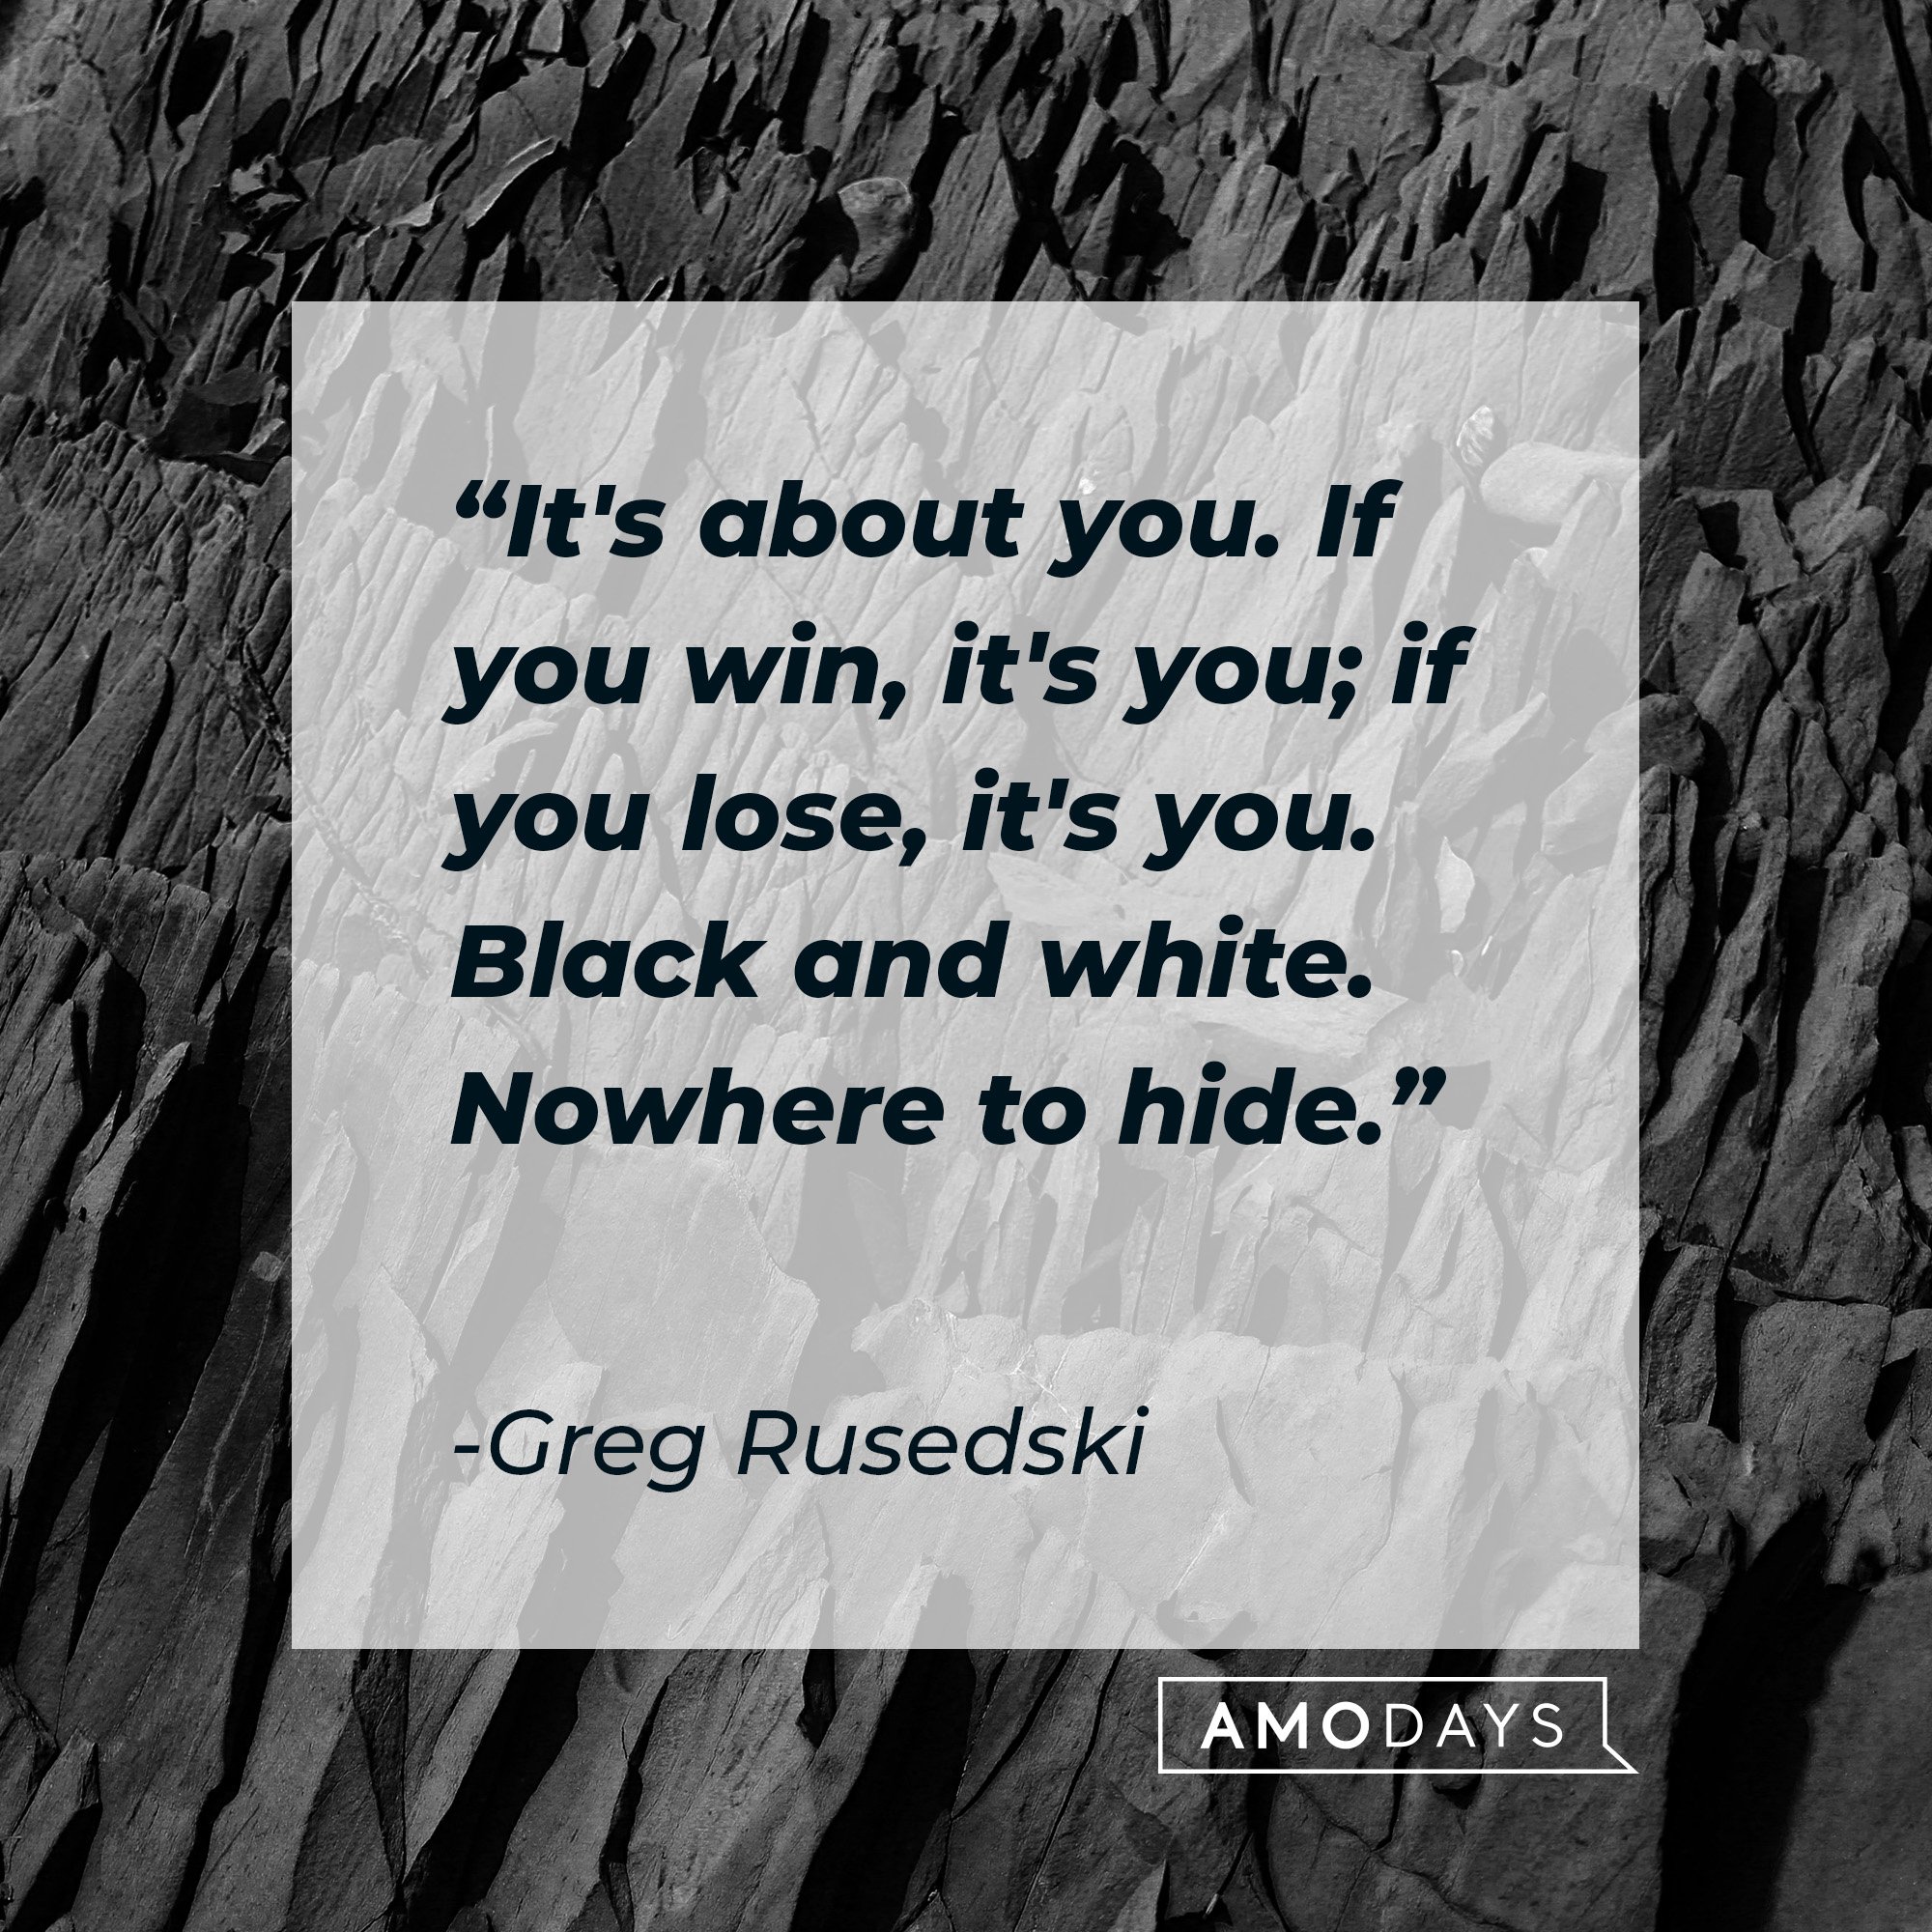 Greg Rusedski’s quote: "It's about you. If you win, it's you; if you lose, it's you. Black and white. Nowhere to hide." | Image: AmoDays